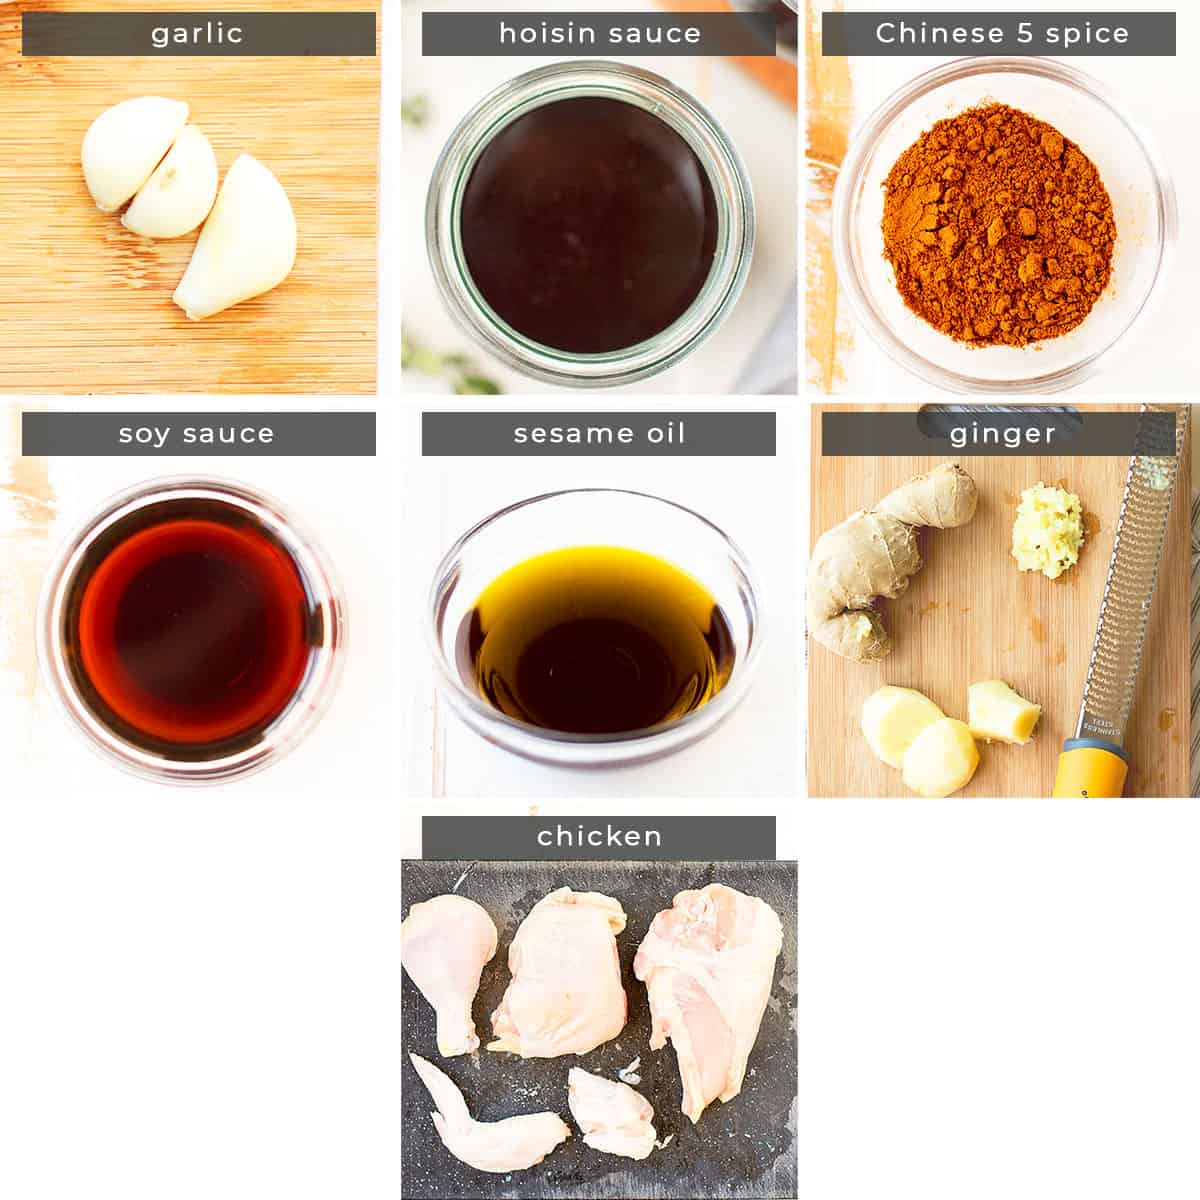 Image containing recipe ingredients garlic, hoisin sauce, Chinese 5 spice, soy sauce, sesame oil, ginger, and chicken. 